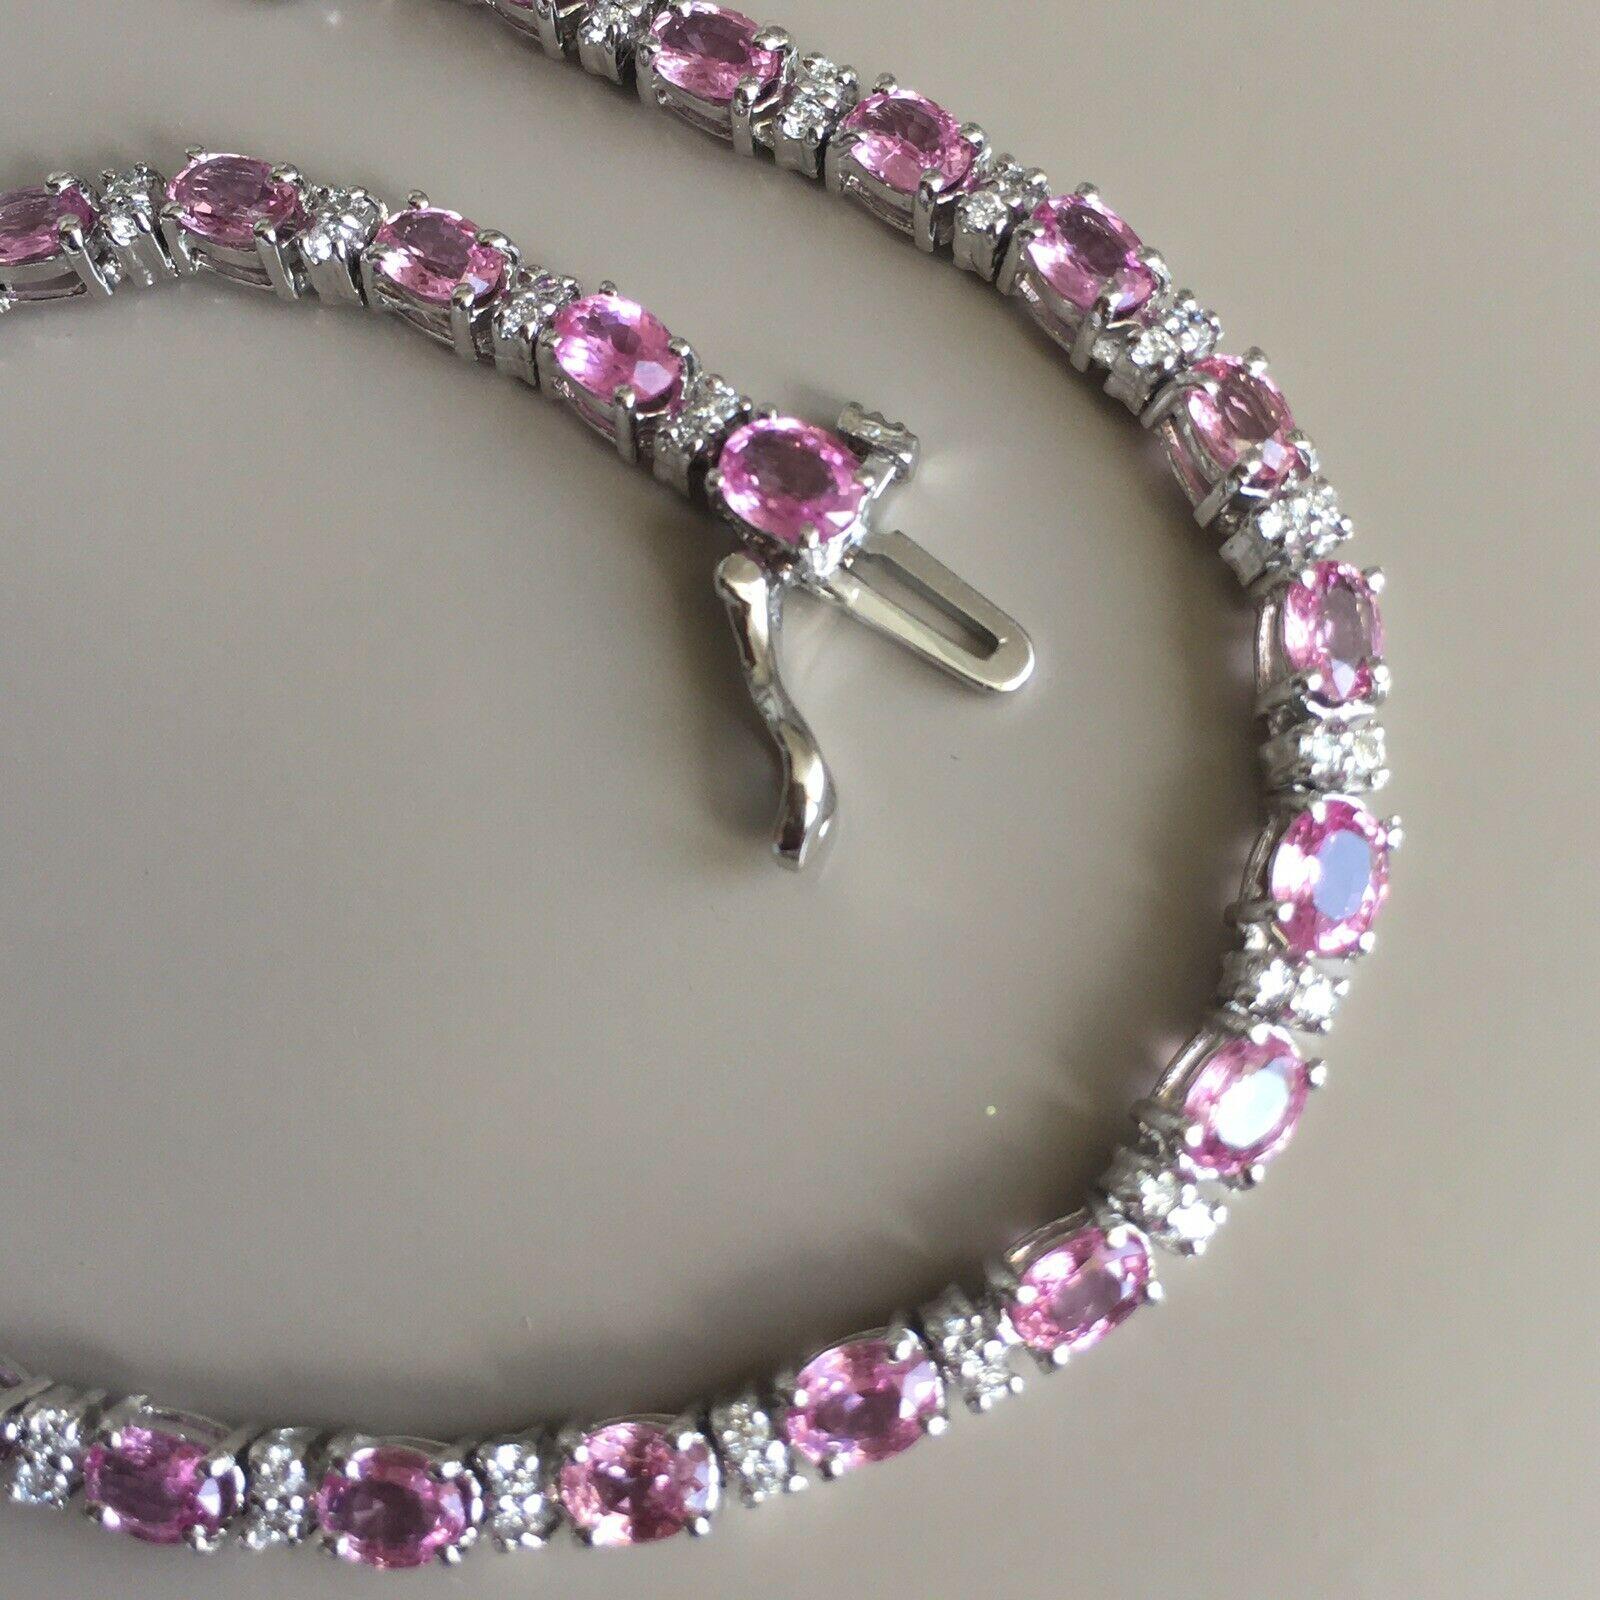 14K White Gold Natural Pink Sapphire & Diamond Double Wire Bracelet, Brand New. 

30 pieces of 2 mm by 4 mm Oval cut matching natural vivid color Pink Sapphires 6.6 Carat total weight and 60 pieces of round cut Diamonds Total Weight of Diamonds .50